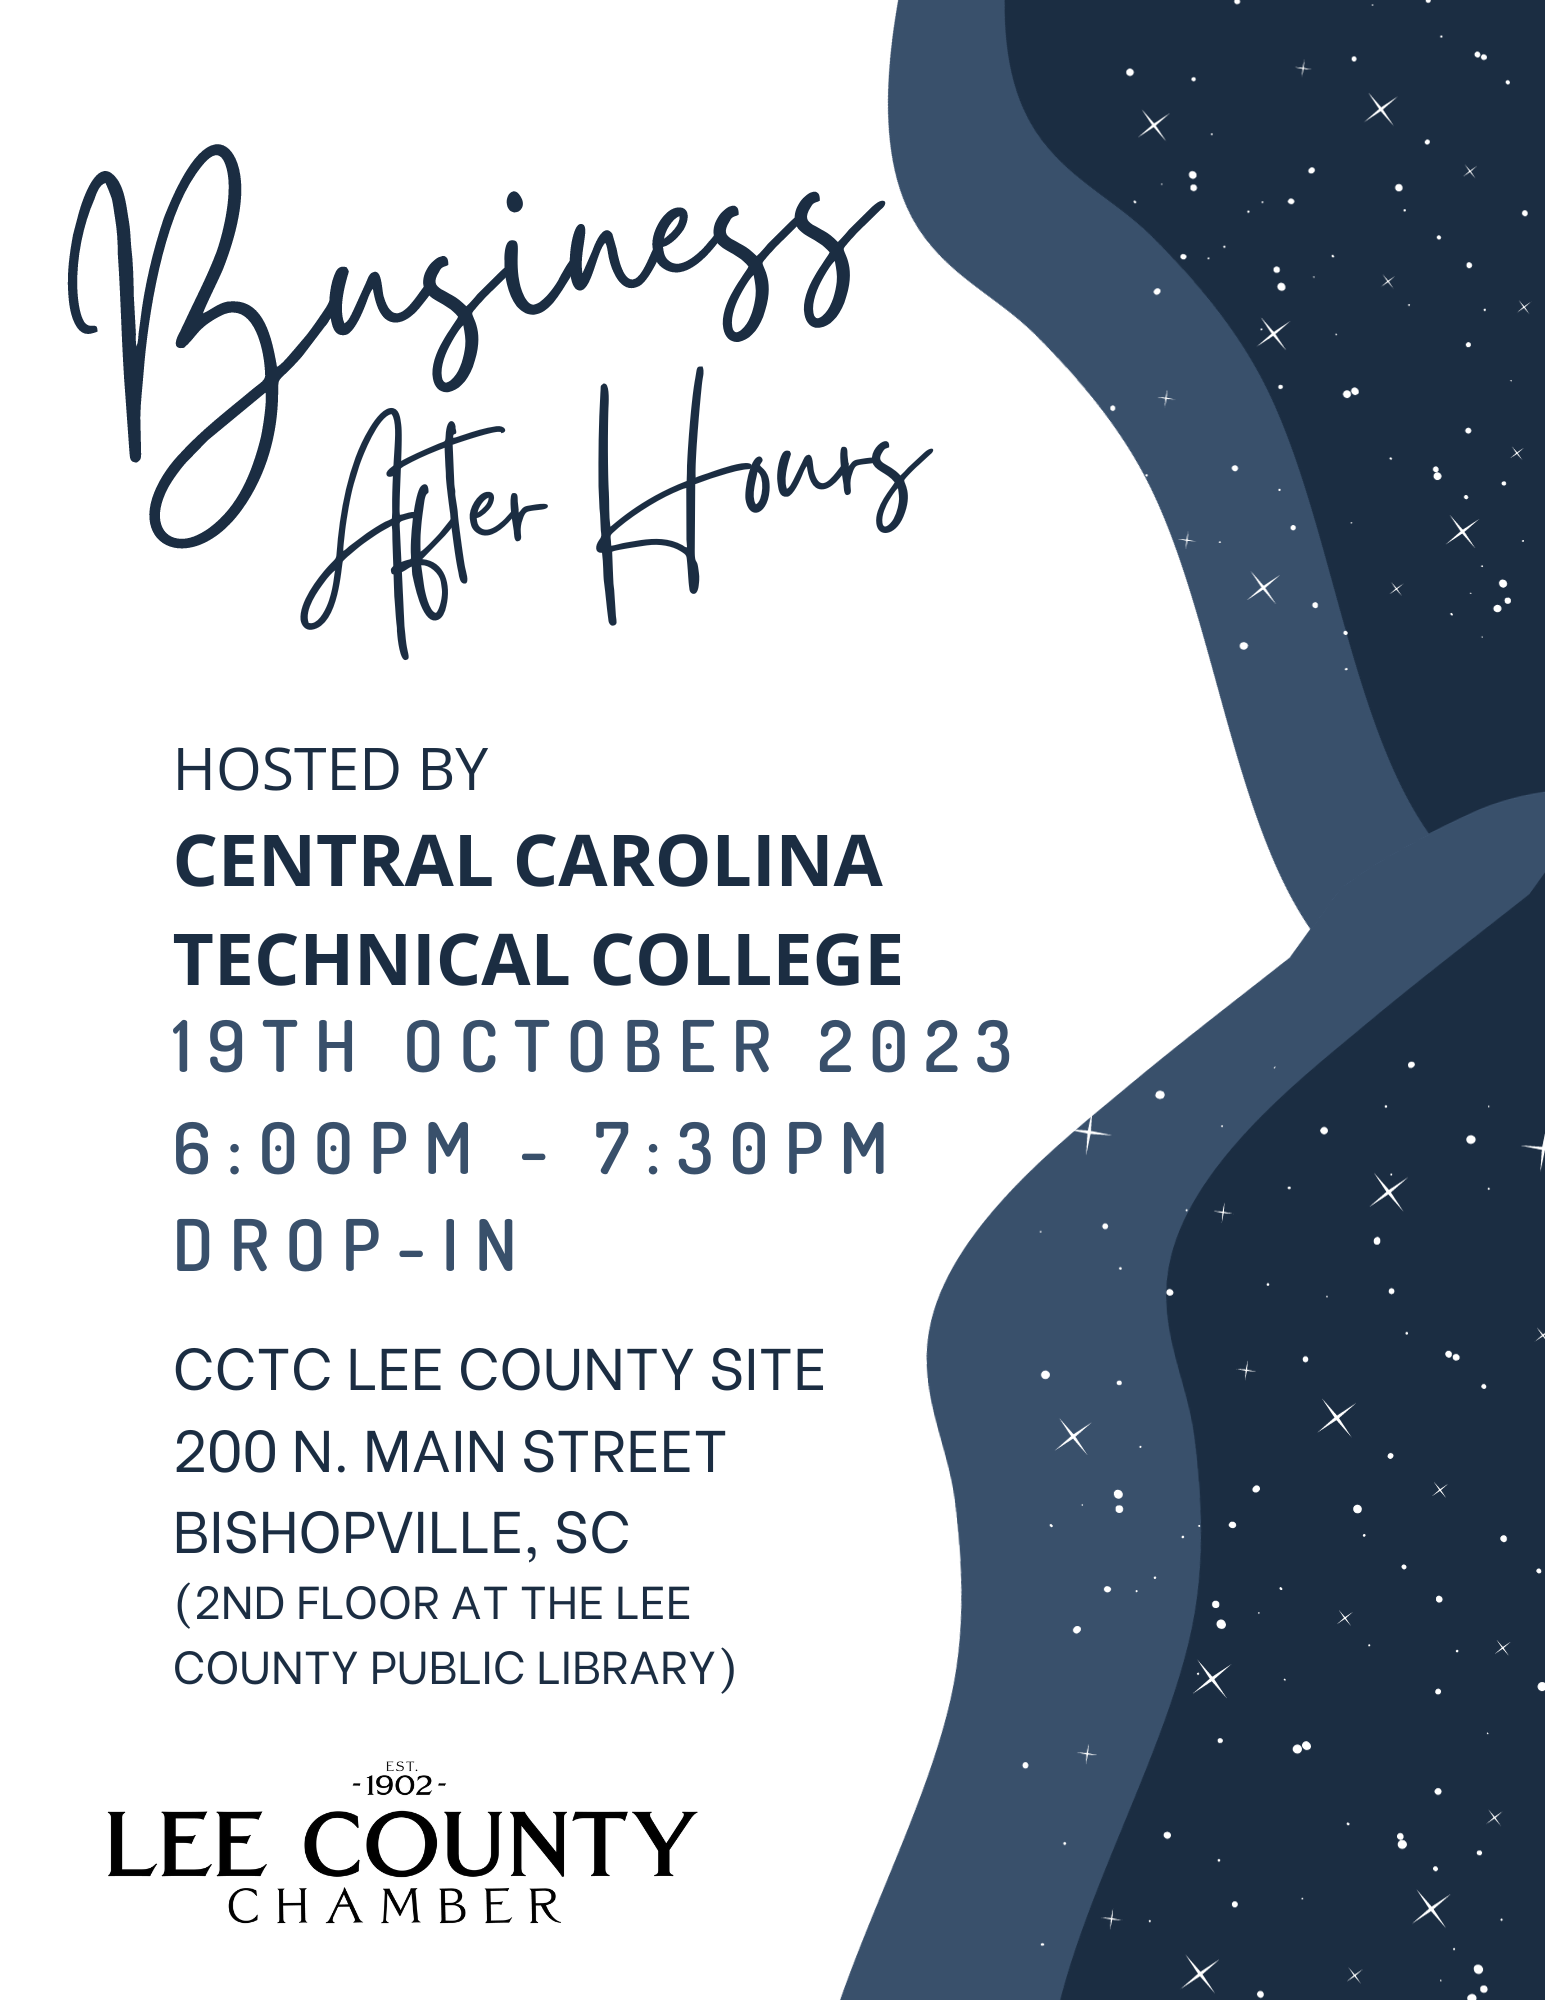 Business After Hours hosted by Central Carolina Technical College October 19, 2023